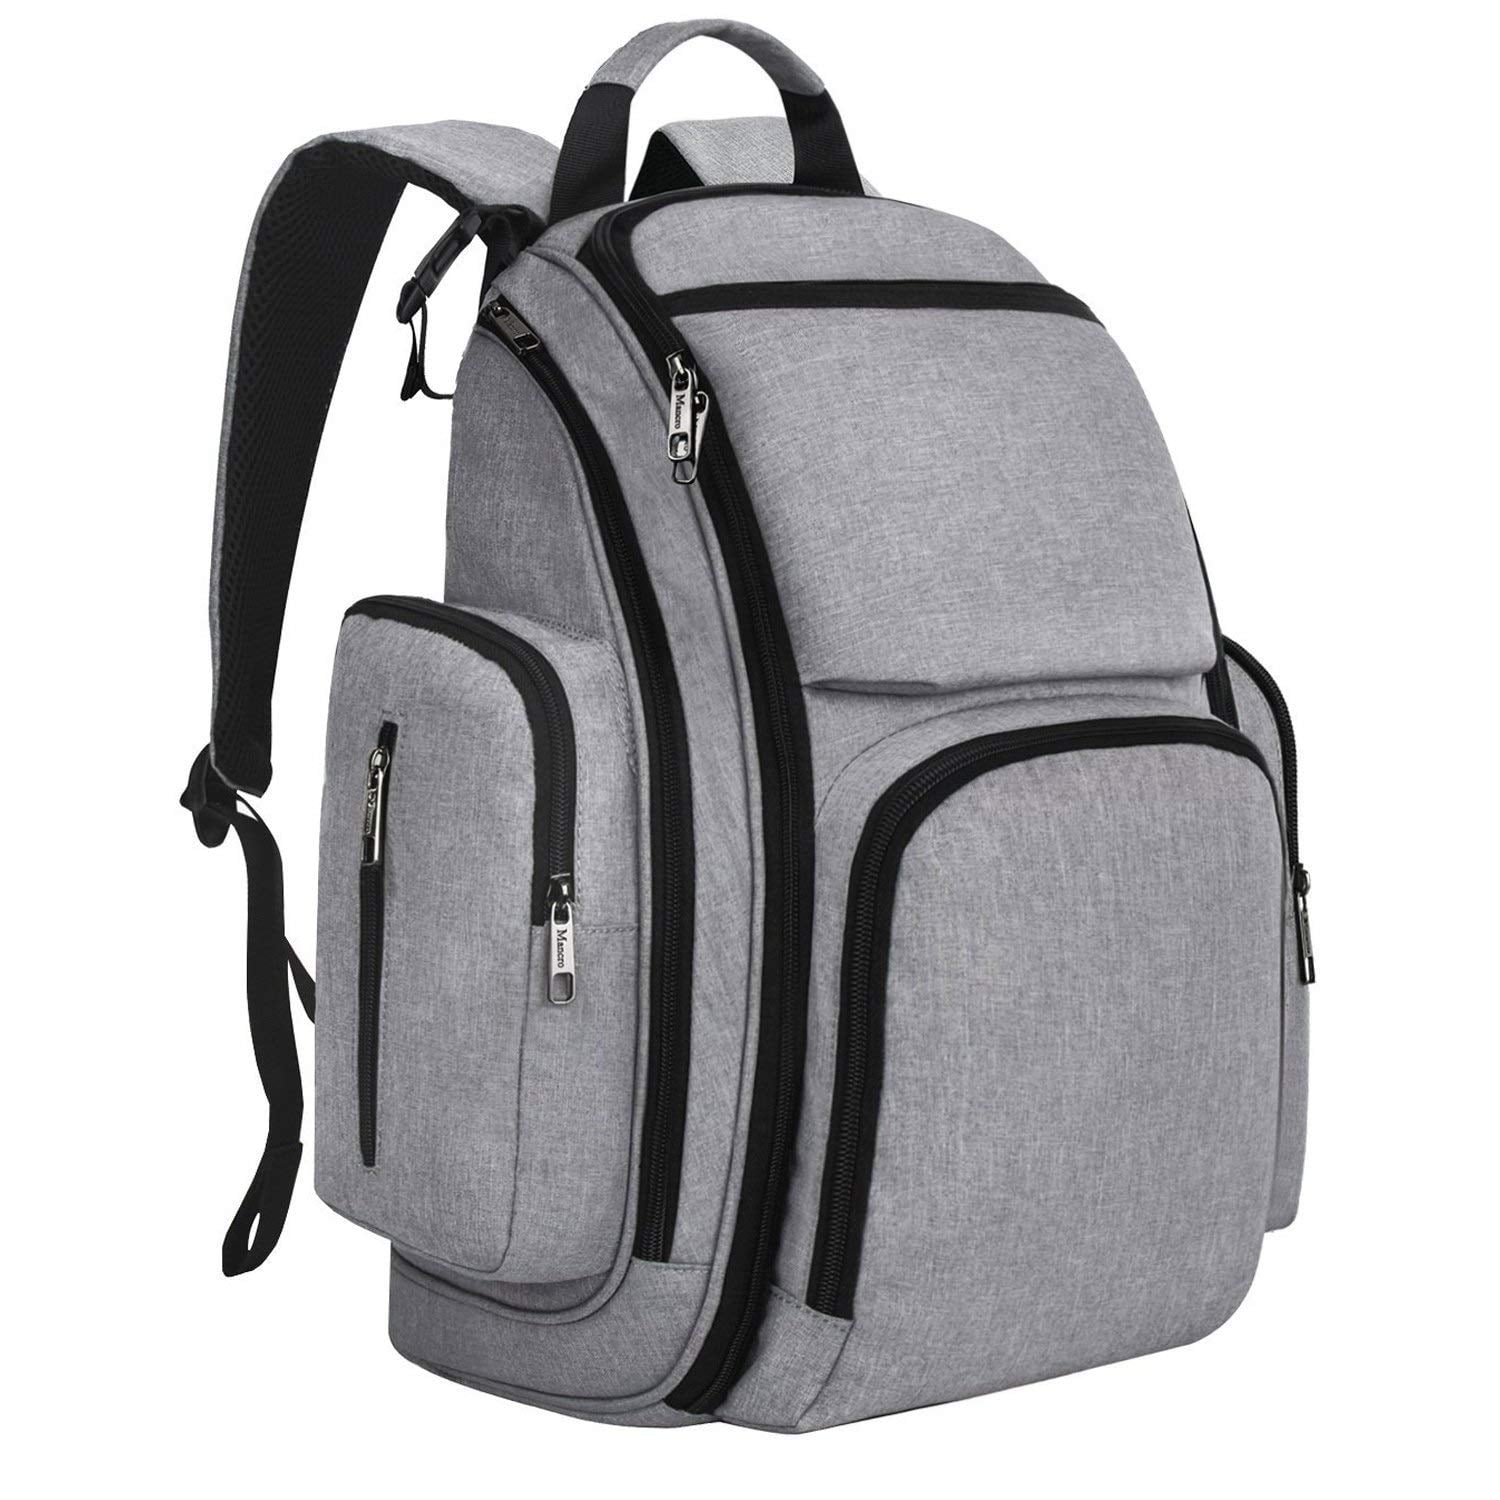 most durable diaper backpack